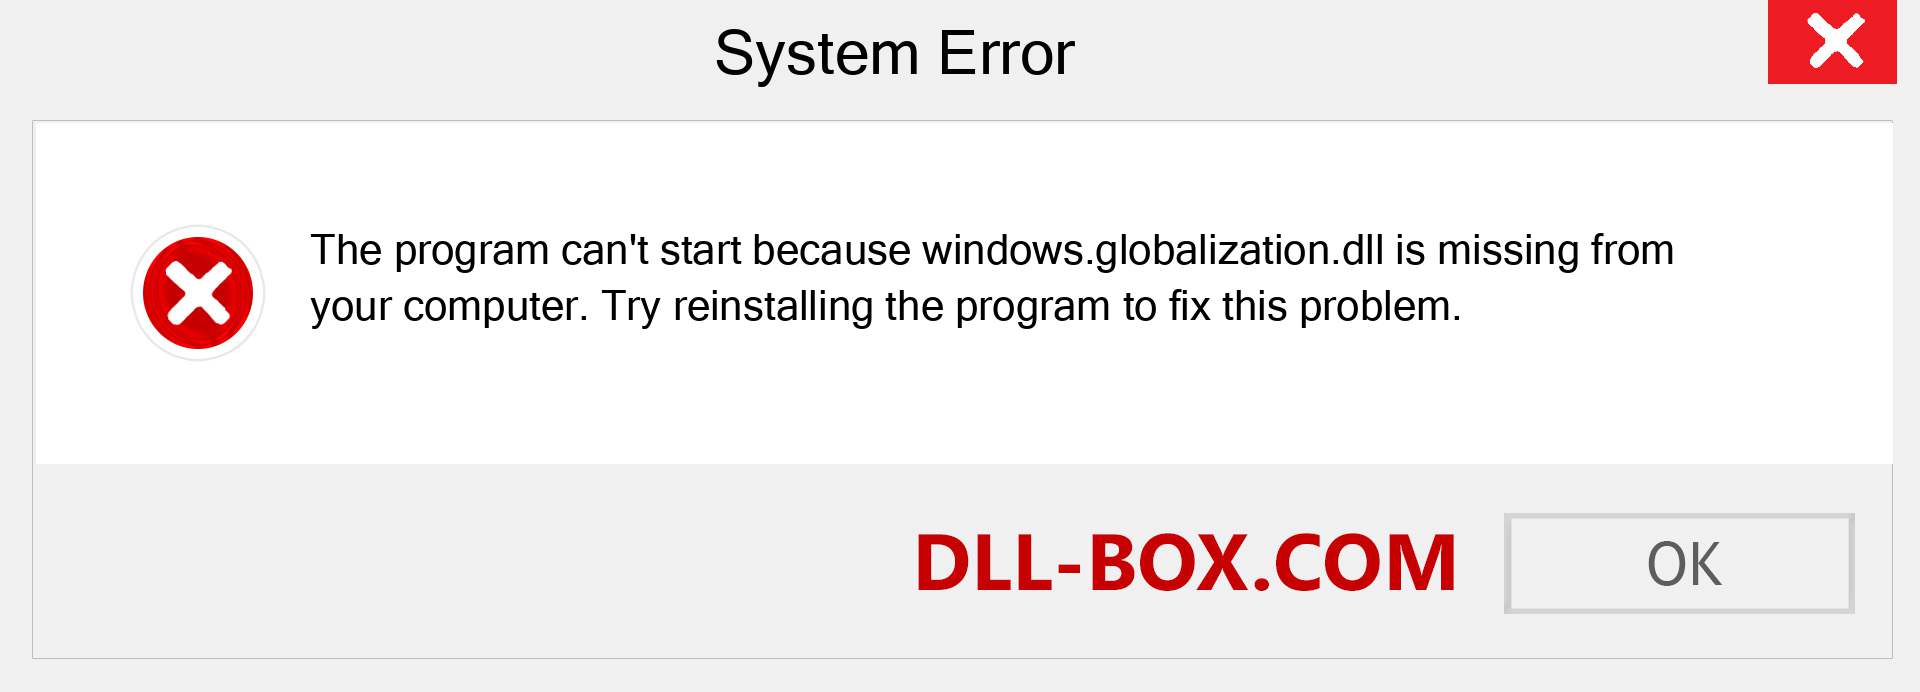  windows.globalization.dll file is missing?. Download for Windows 7, 8, 10 - Fix  windows.globalization dll Missing Error on Windows, photos, images